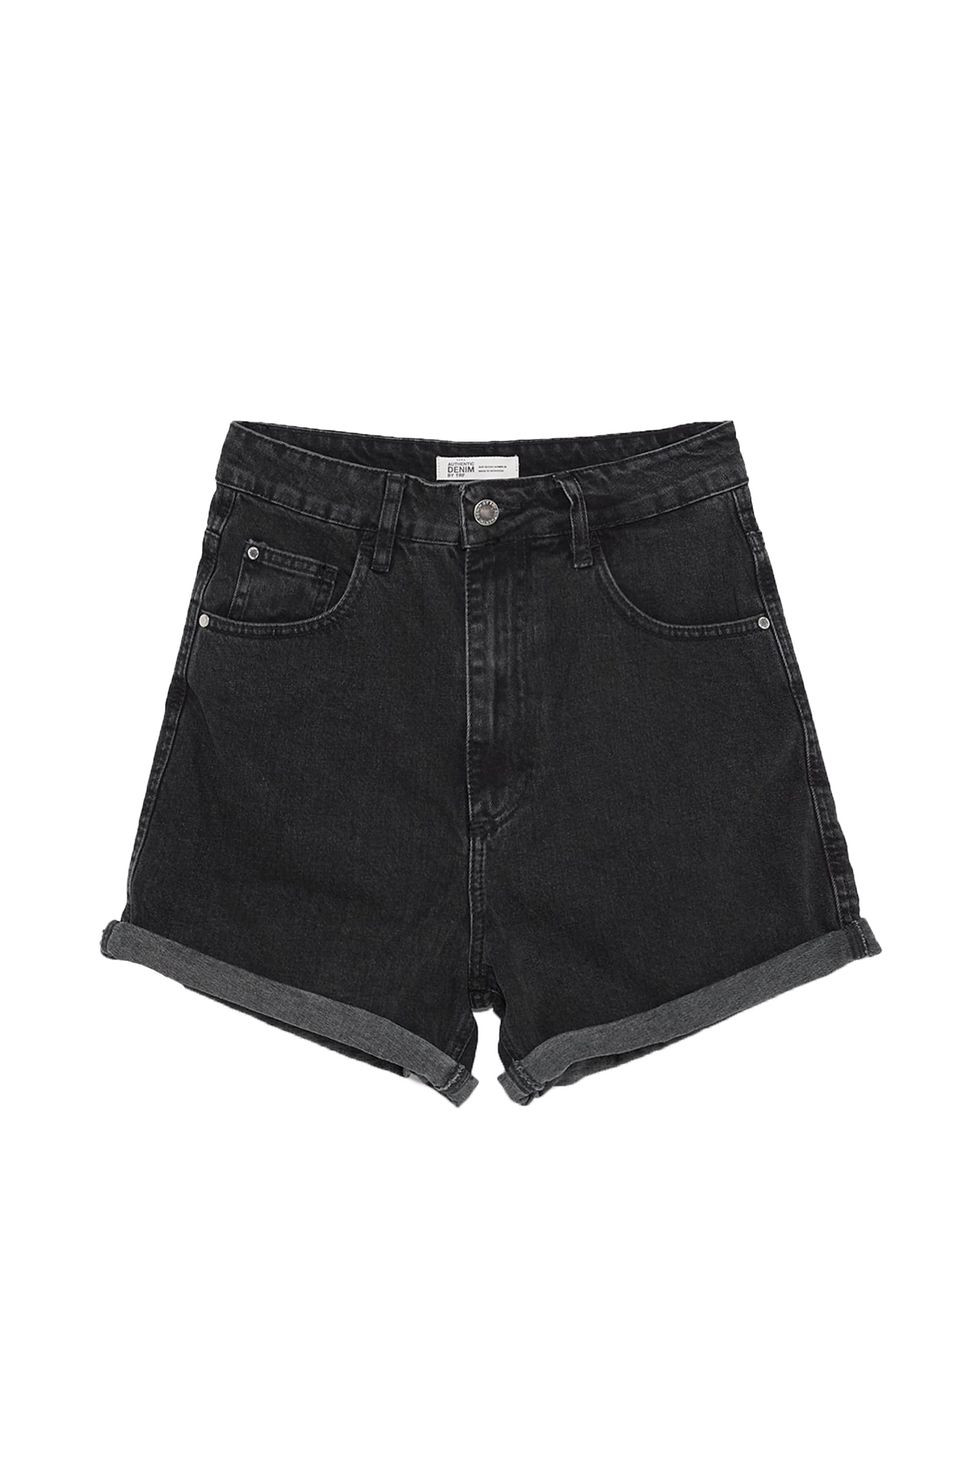 Our Favorite Mom-Friendly Shorts for Summer